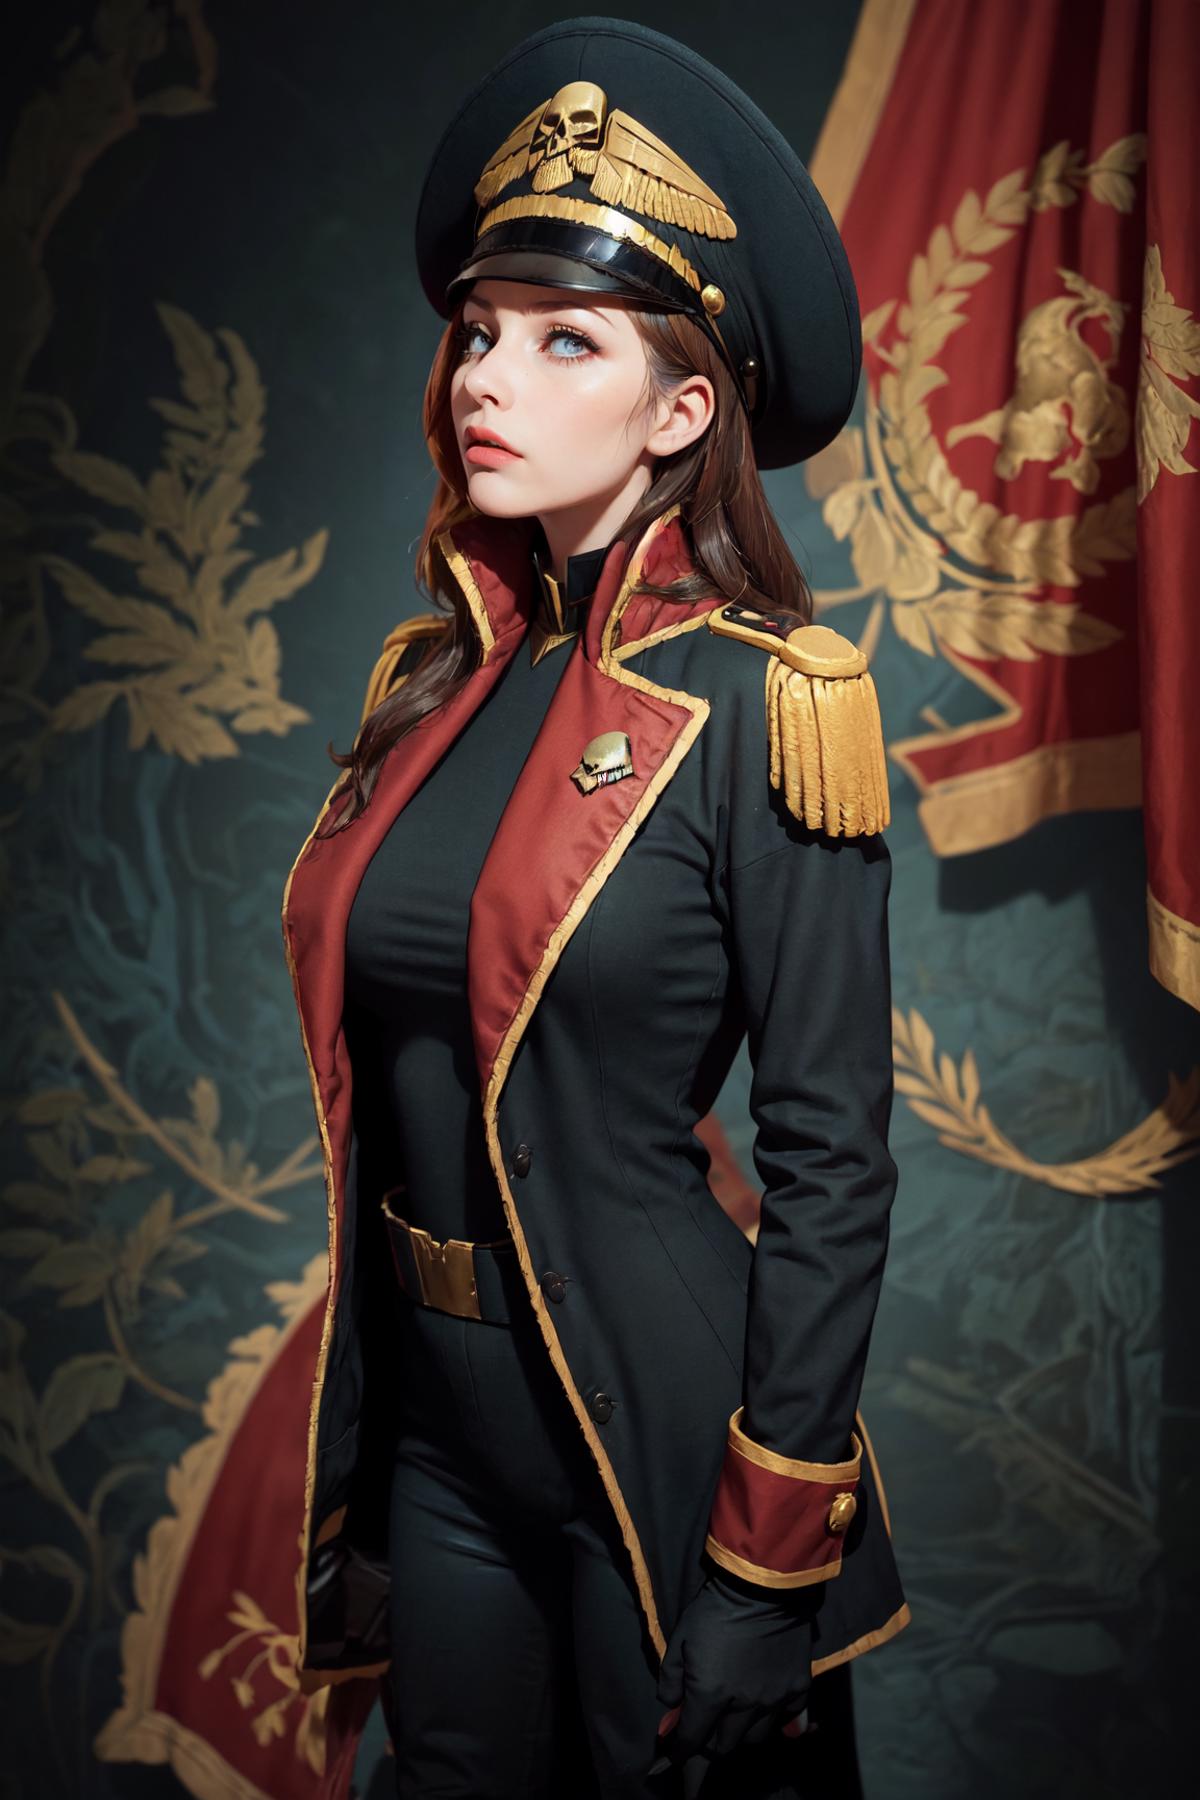 Warhammer 40K Commissar Outfit - by EDG image by pizzagirl